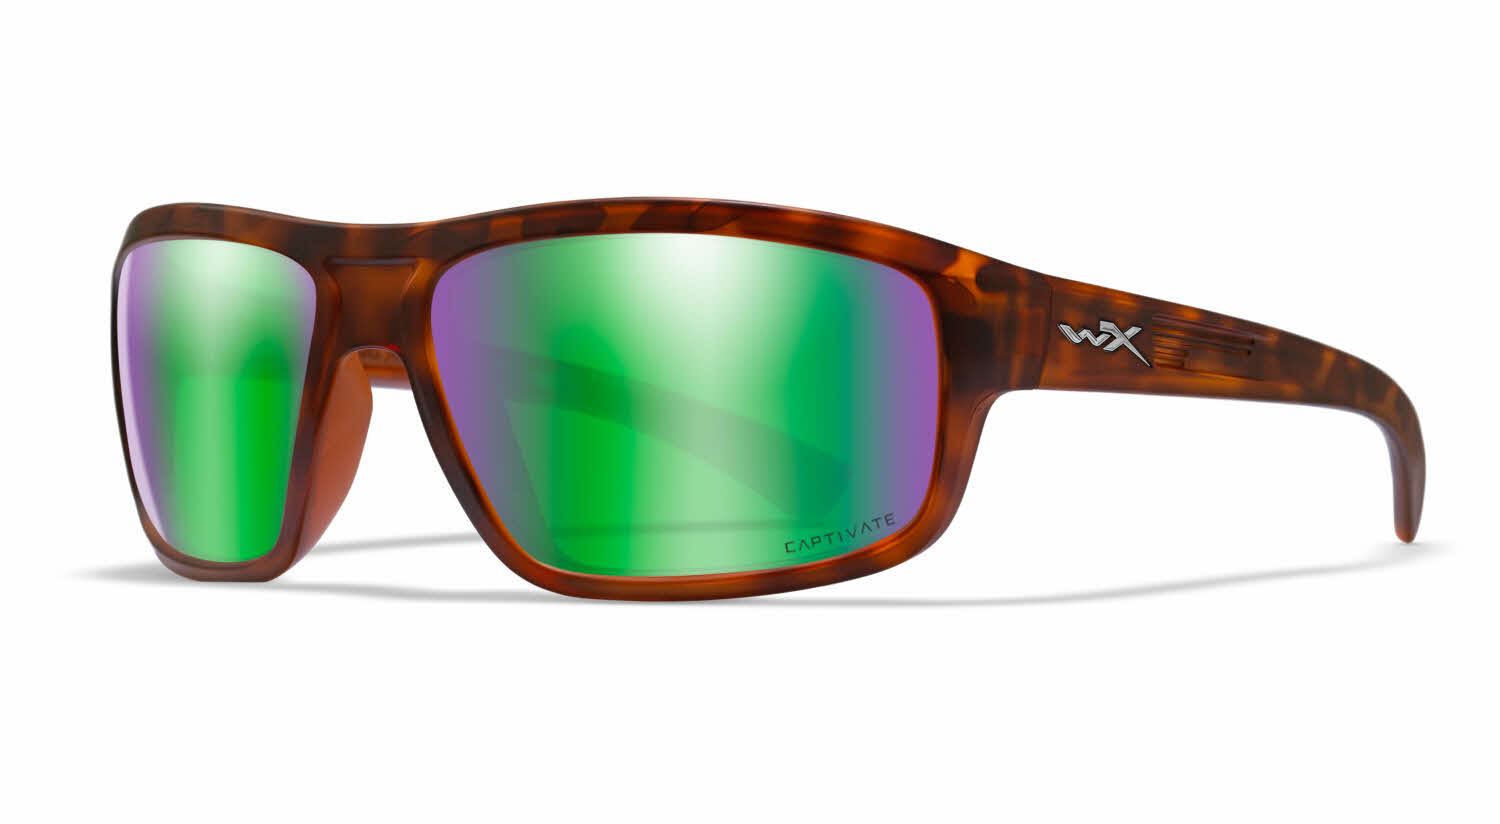 Wiley X WX Contend Sunglasses